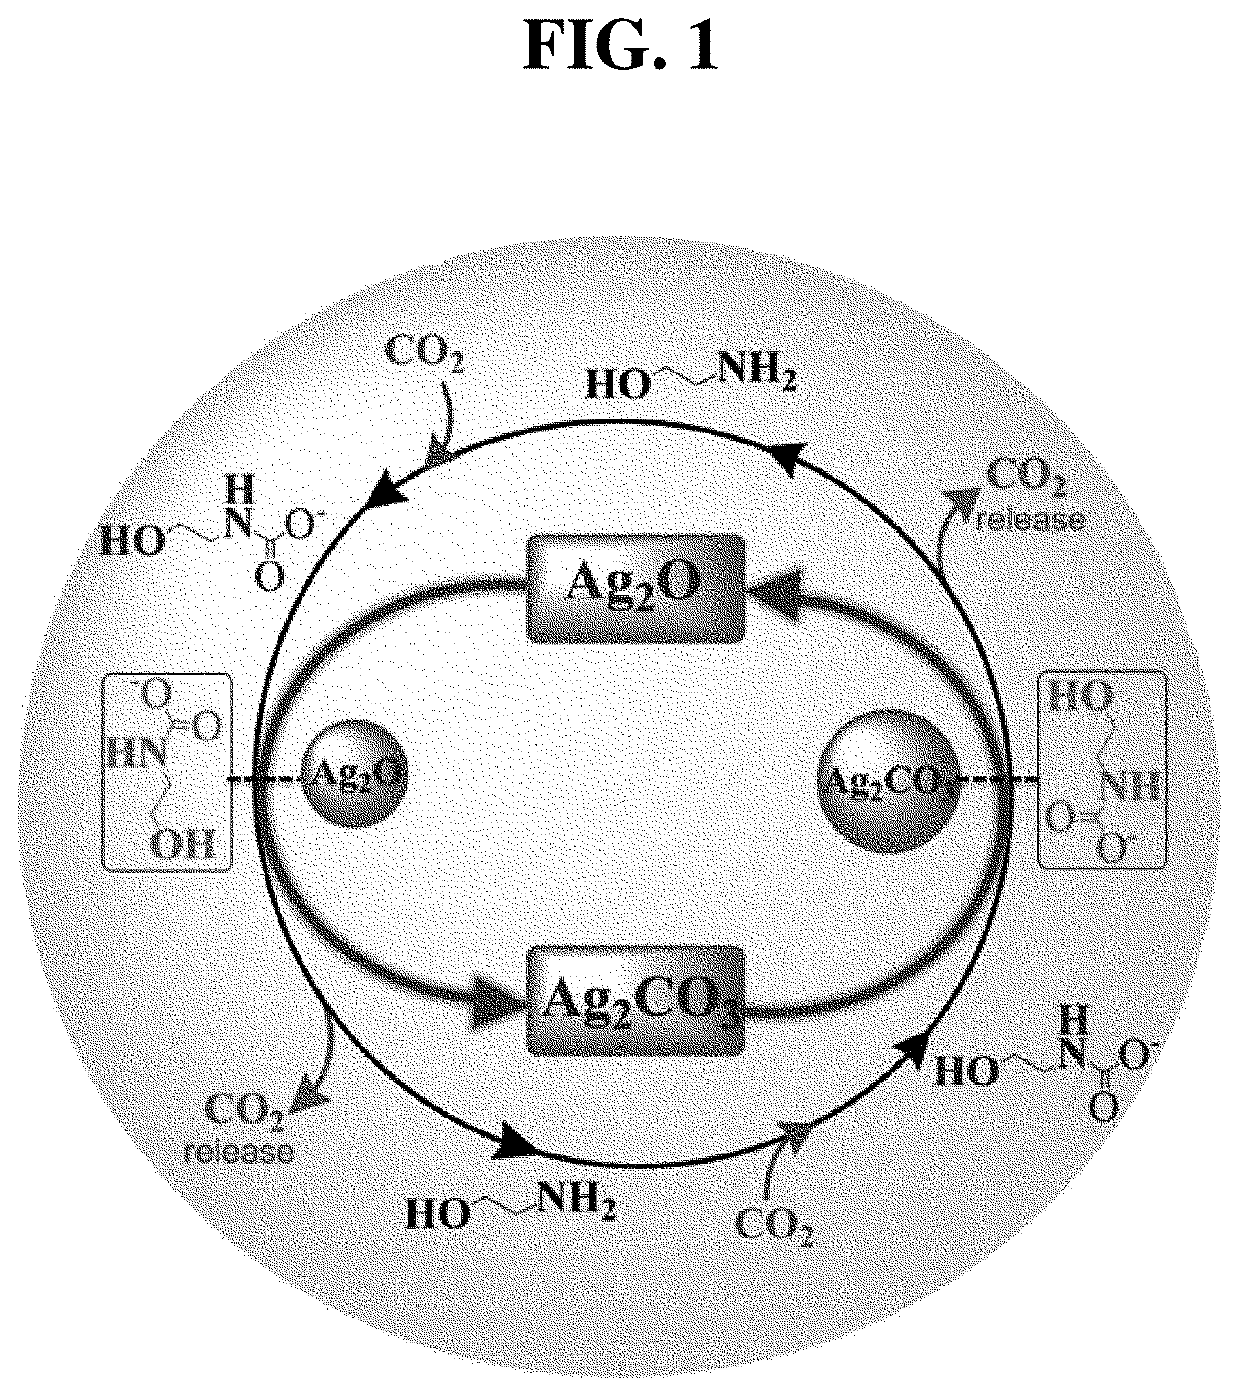 Method for regenerating an amine-based, acid gas absorbent using a catalyst mixture containing silver oxide and silver carbonbate